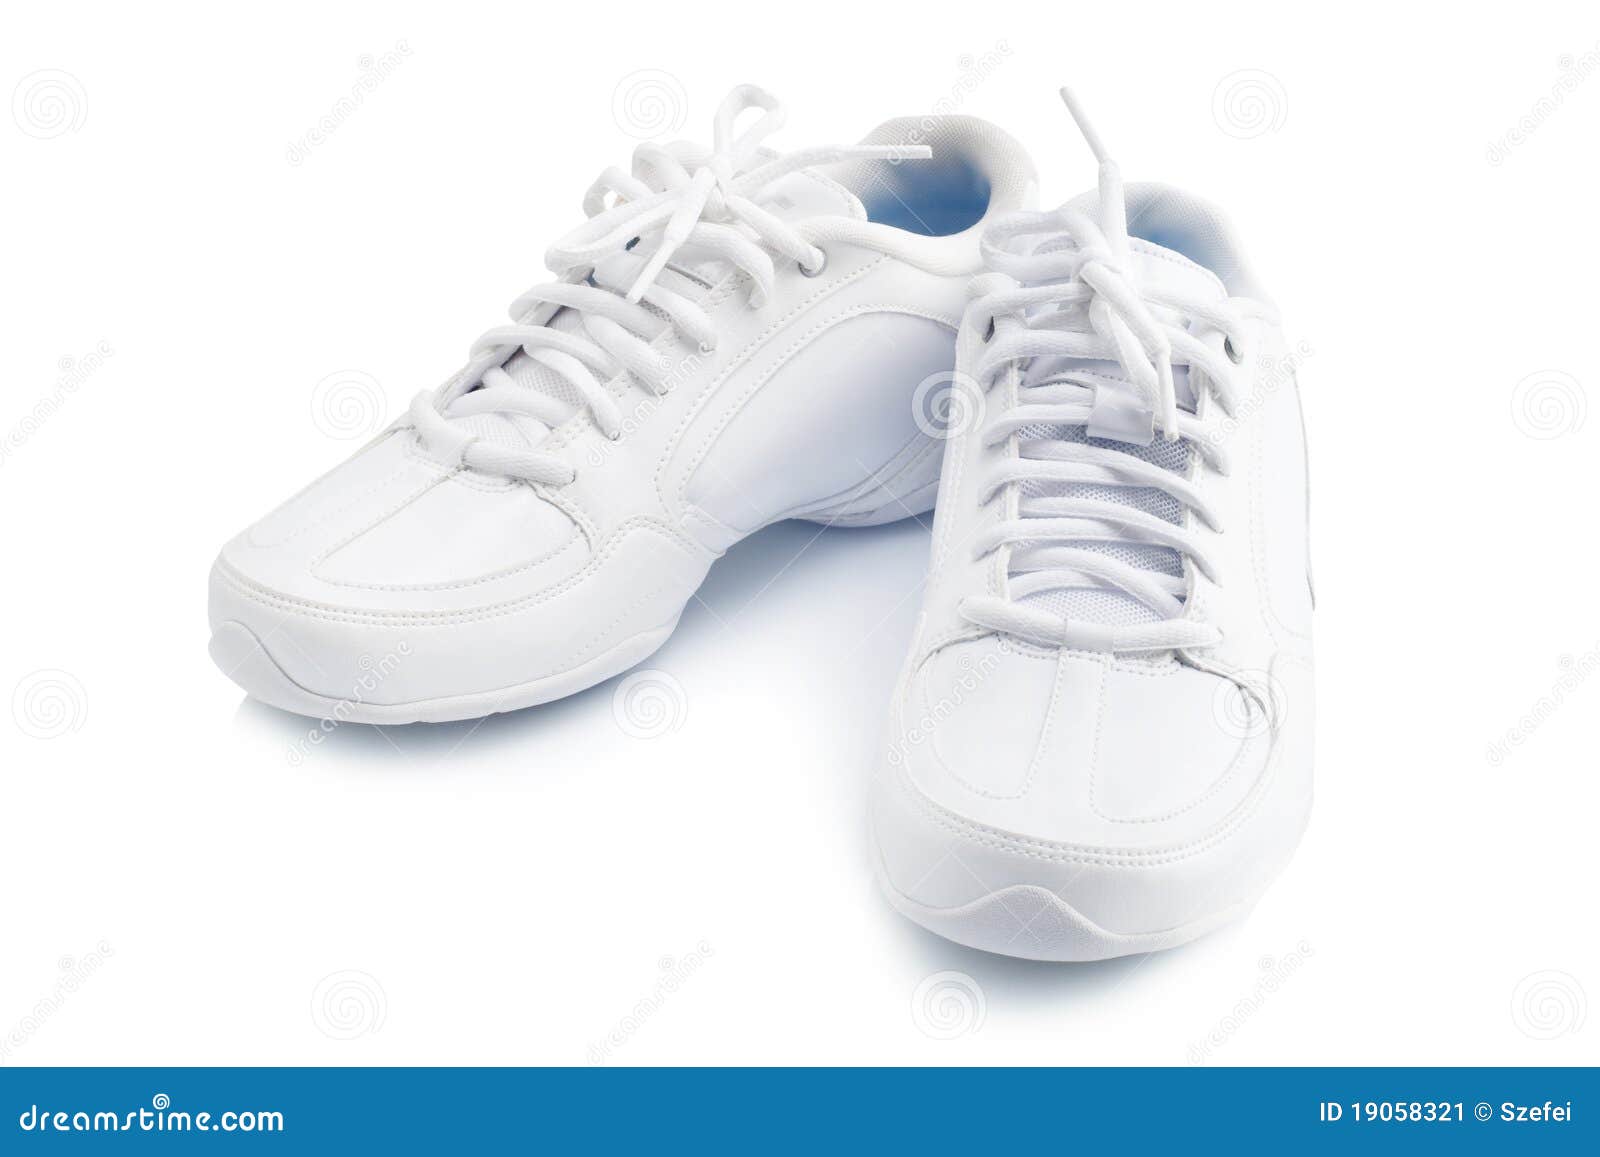 Sneakers stock image. Image of side, lace, color, objects - 19058321